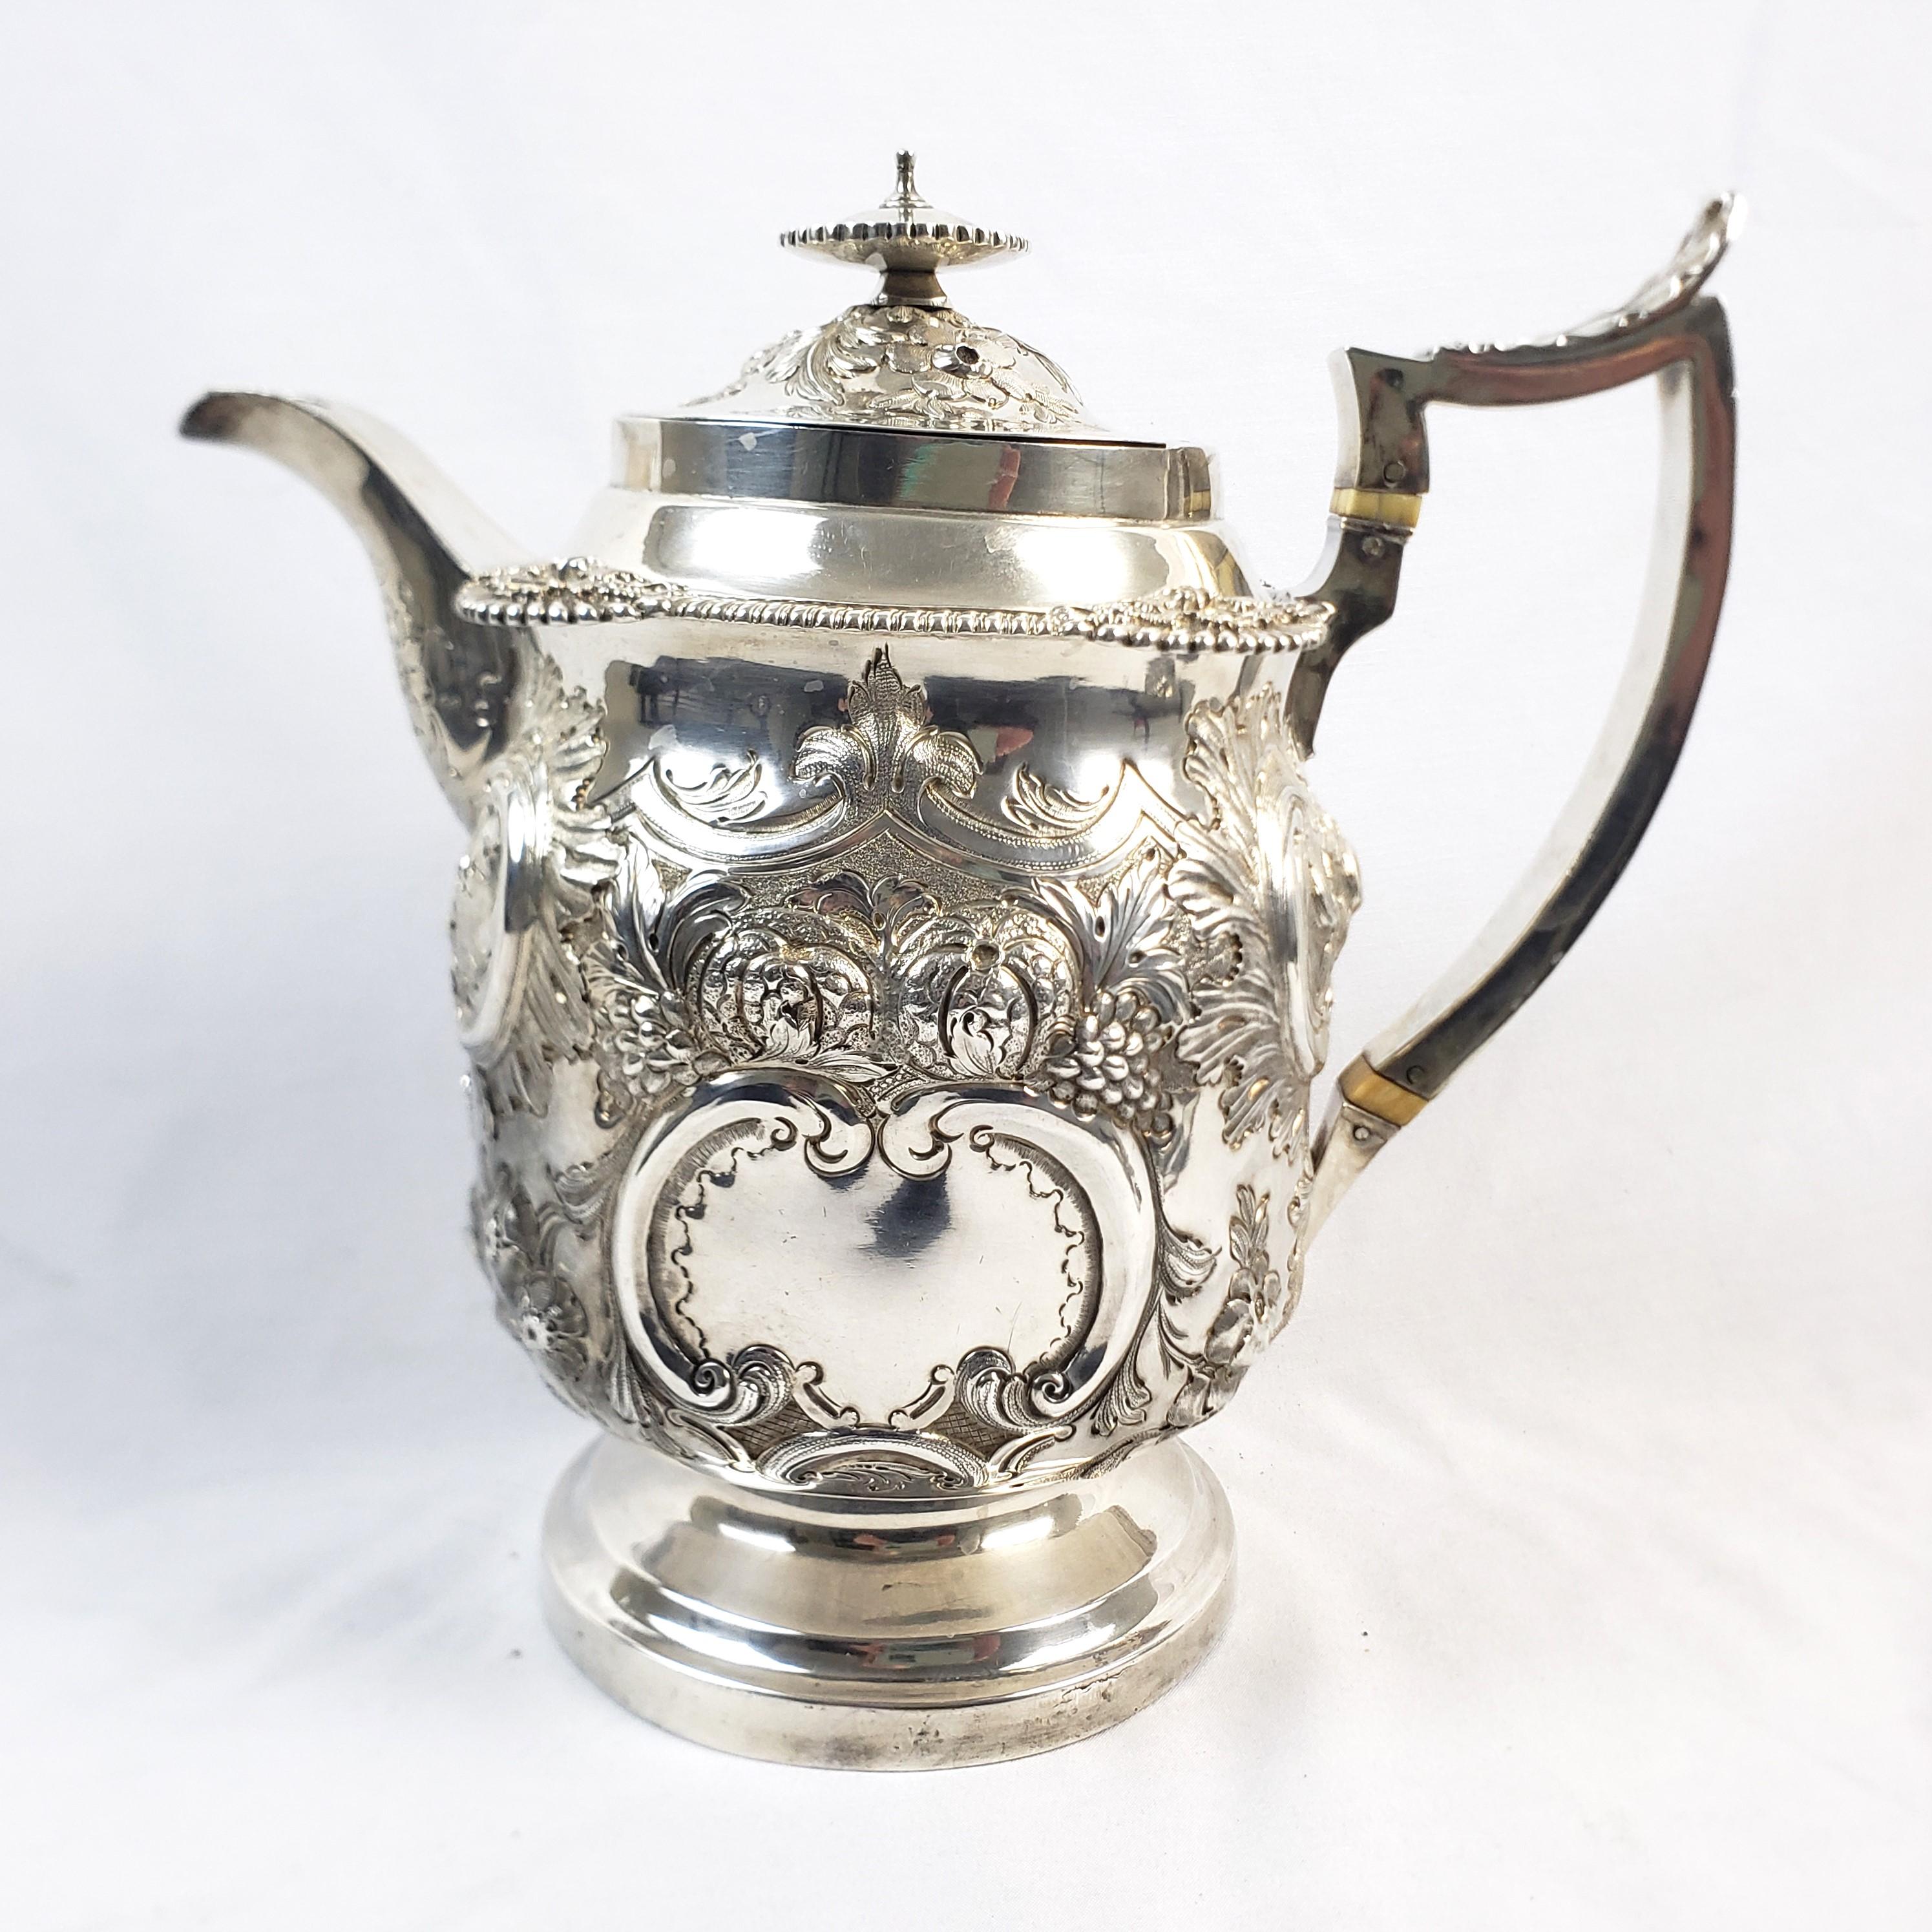 This antique teapot is unsigned, but originated from England and dates to approximately 1817 and done in the period Georgian style. The teapot is composed of sterling silver and is covered with very ornate raised or repousse floral and leaf